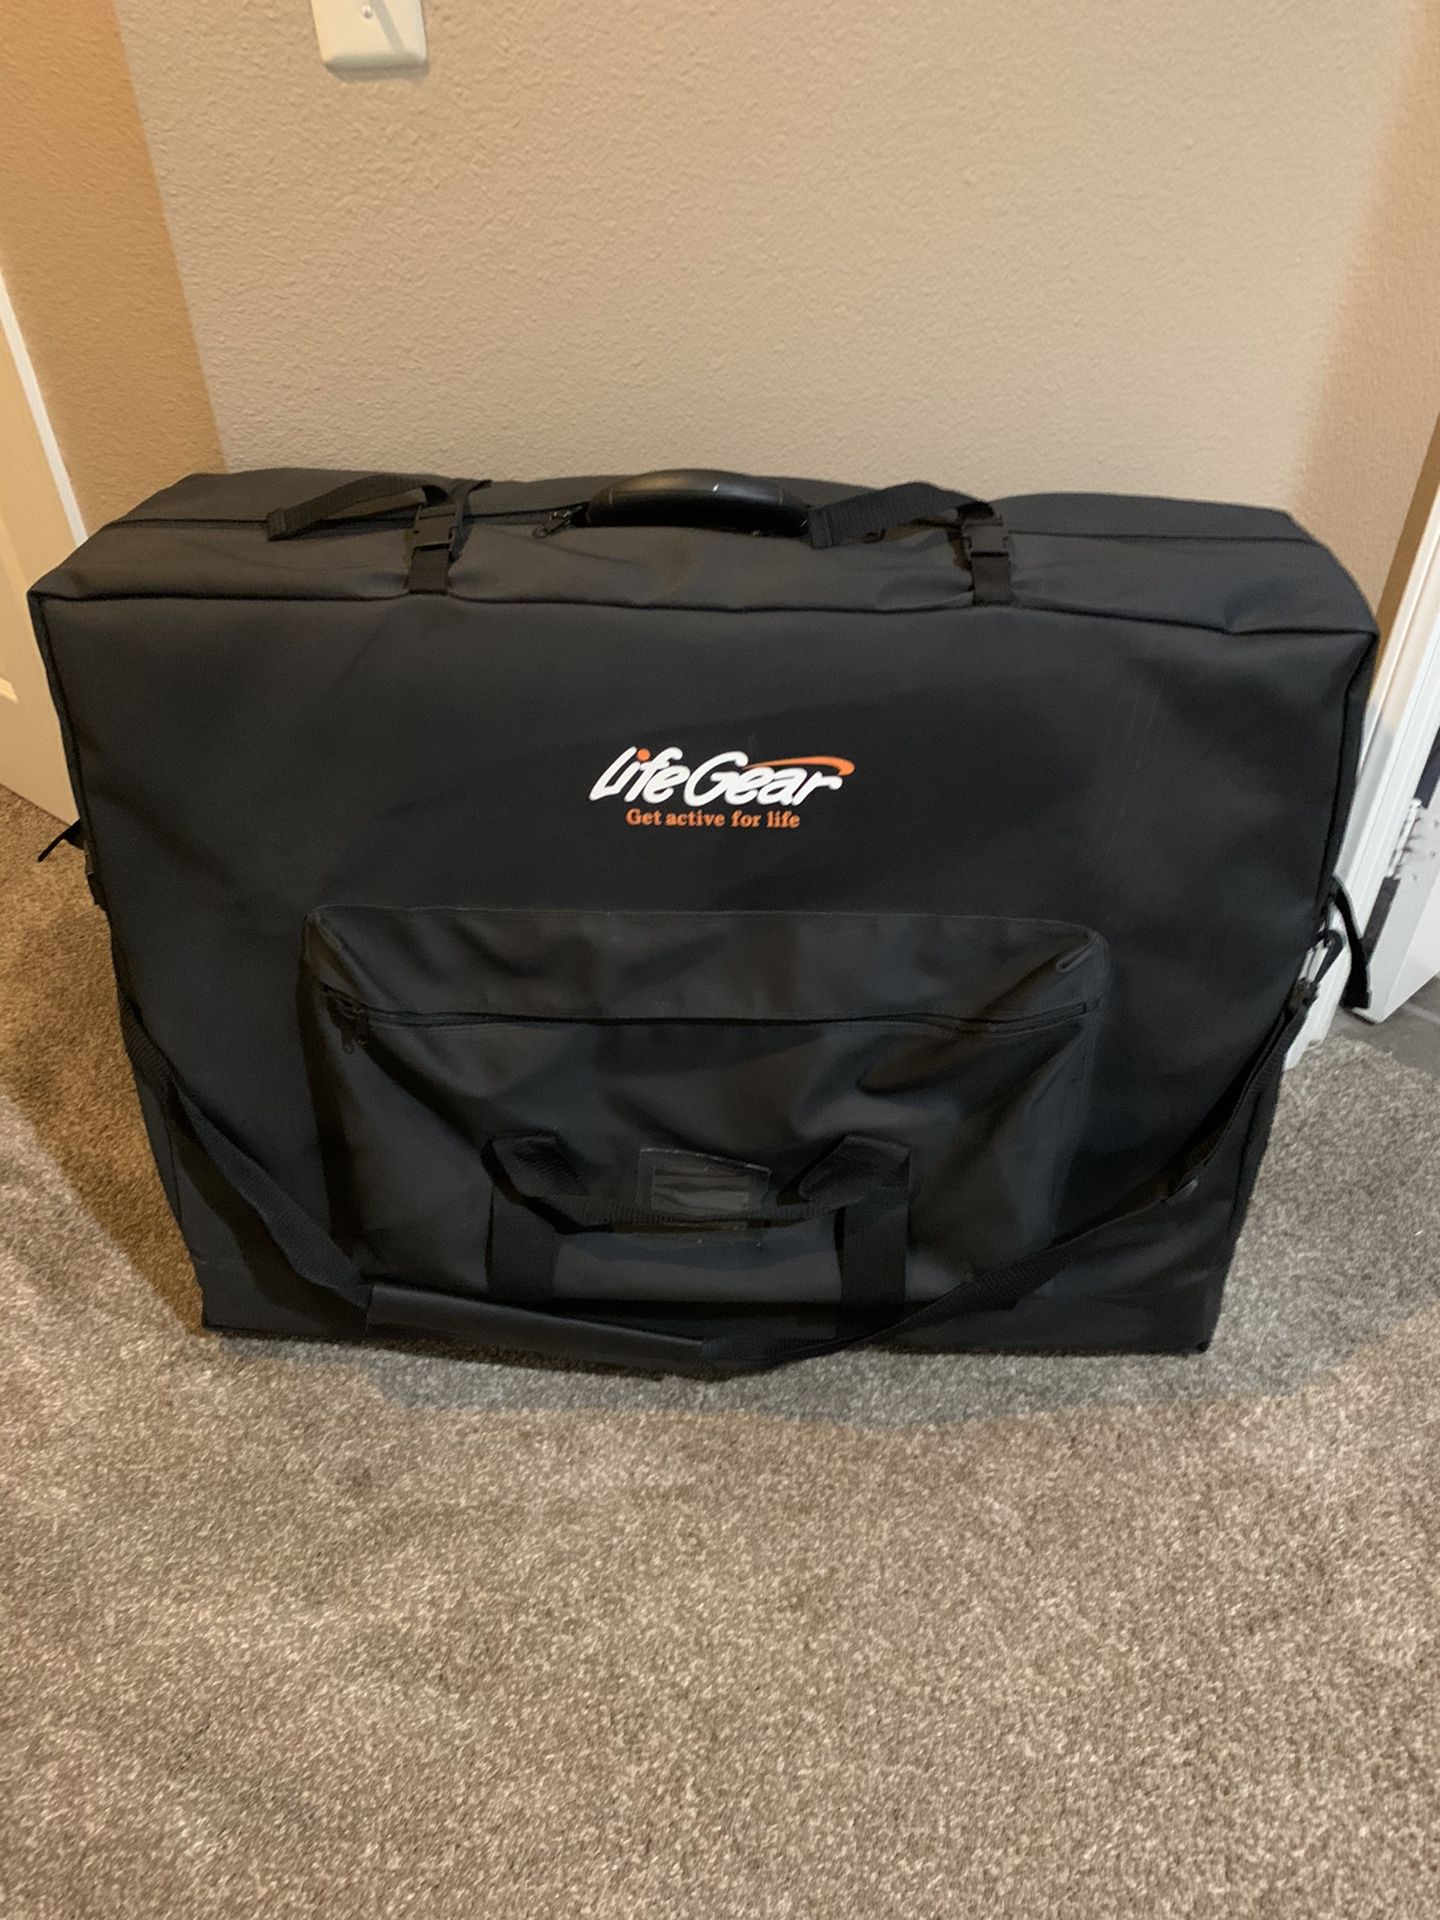 Massage table with carry bag, like new